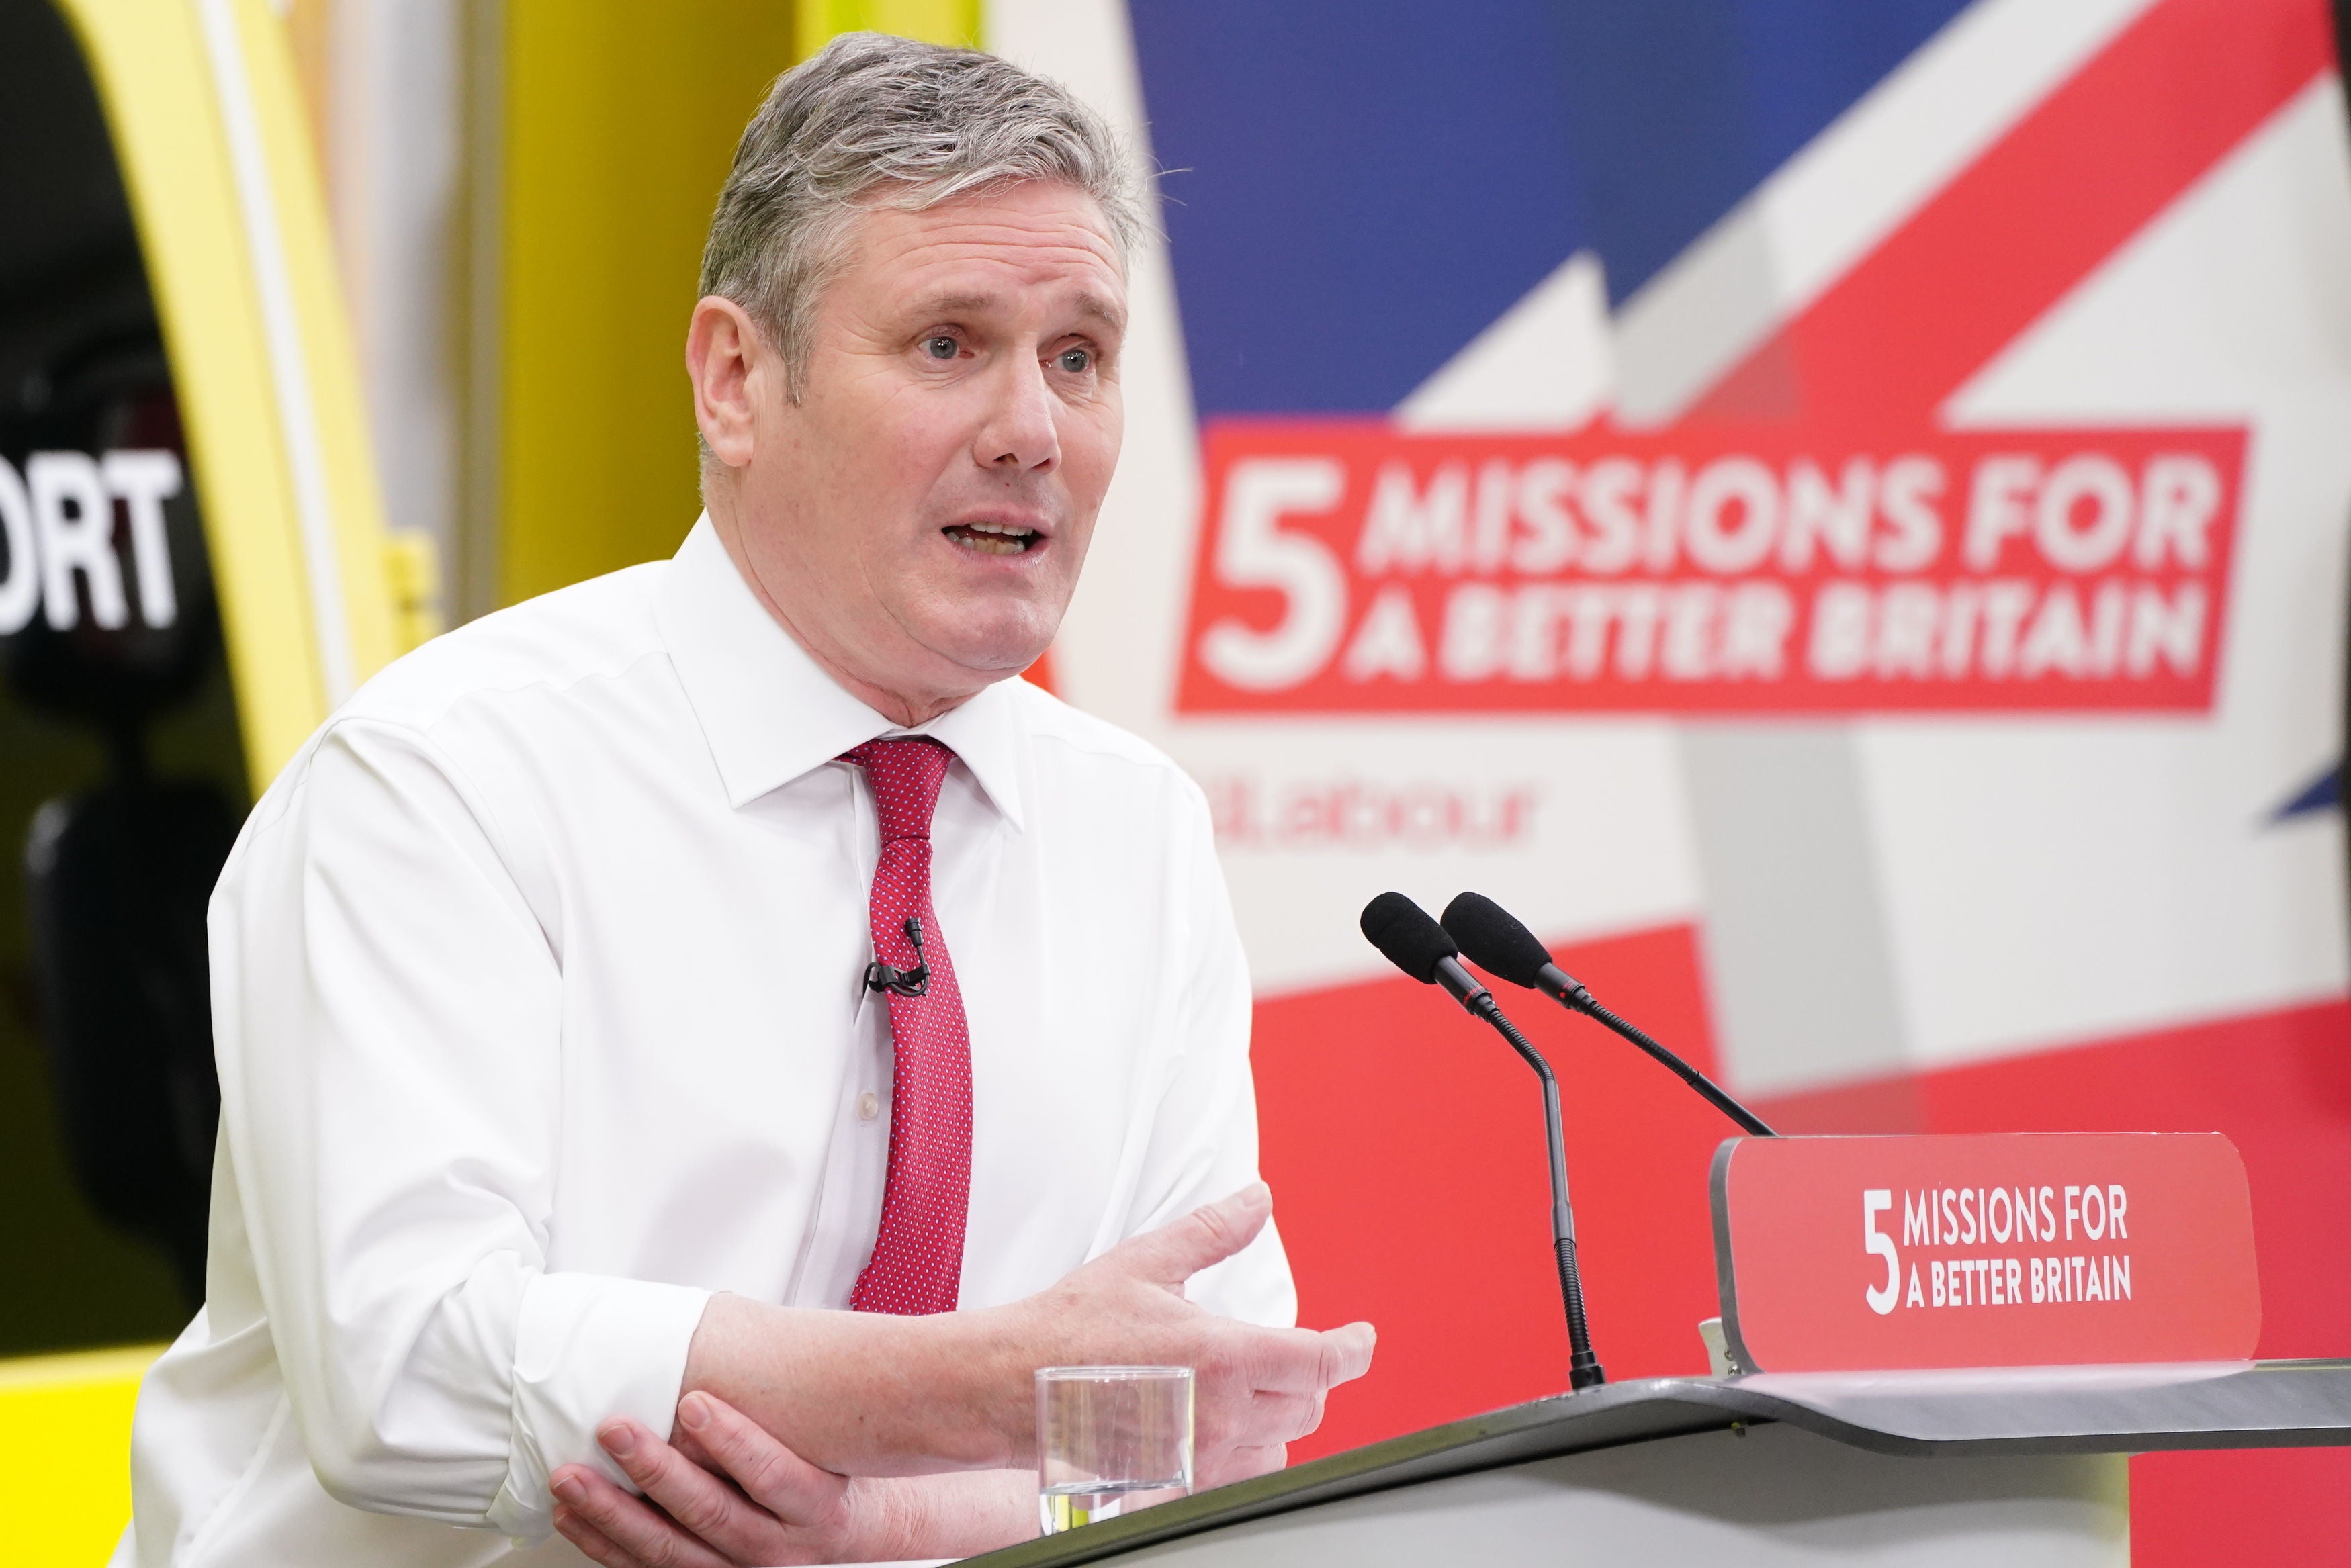 Lords reform is not one of Labour’s ‘five missions’ but will be in its manifesto, says Keir Starmer